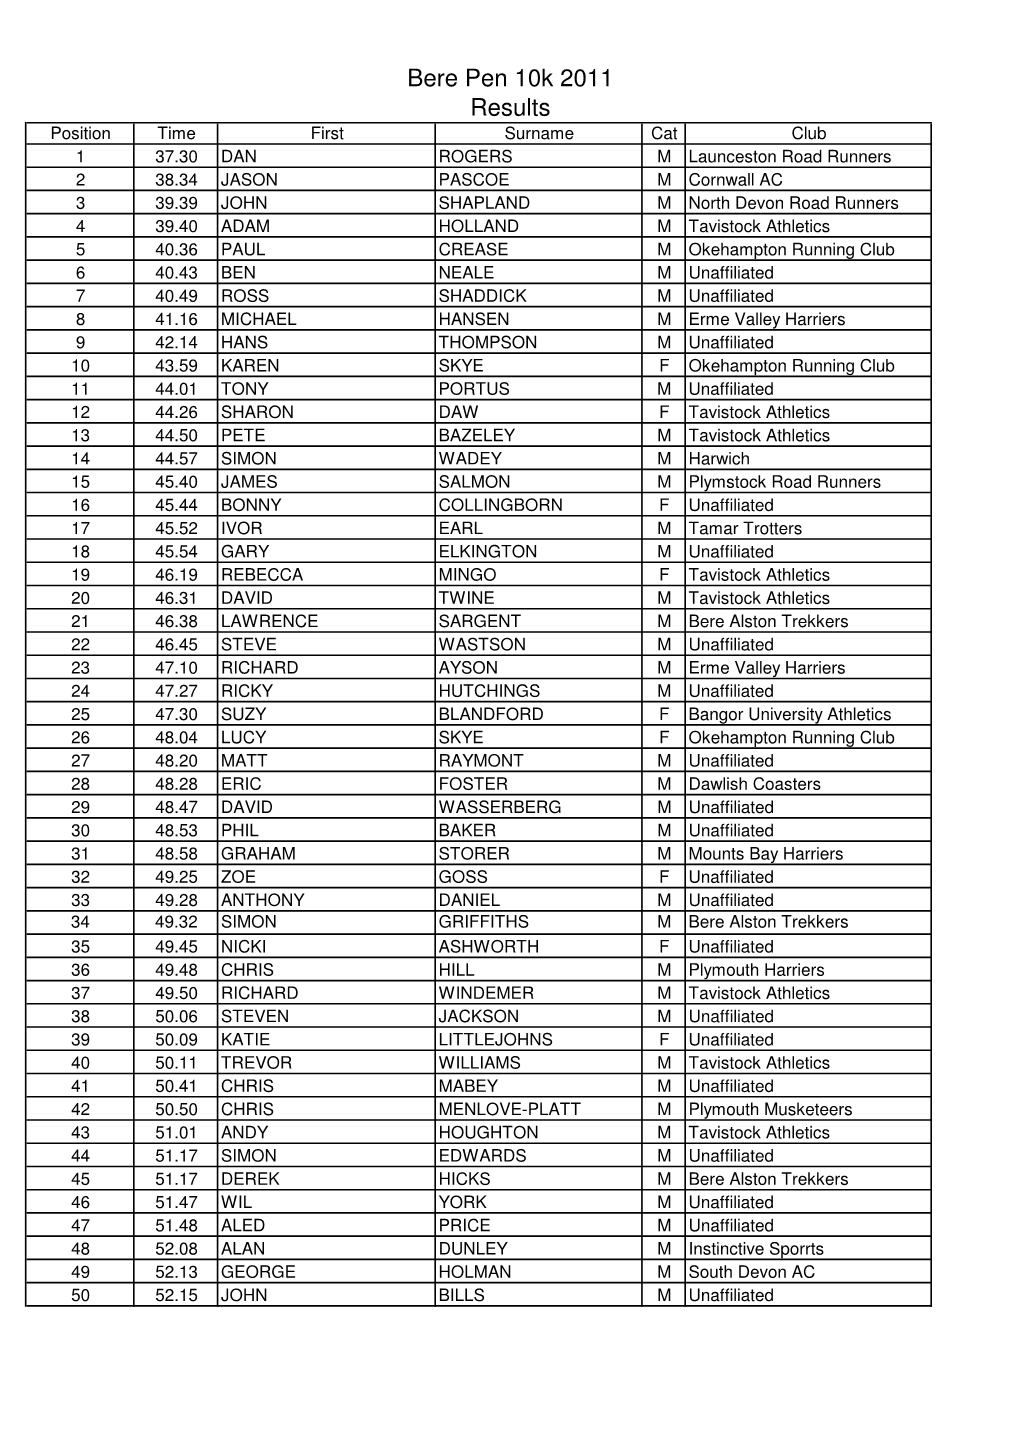 Bere Pen 10 Results 2011